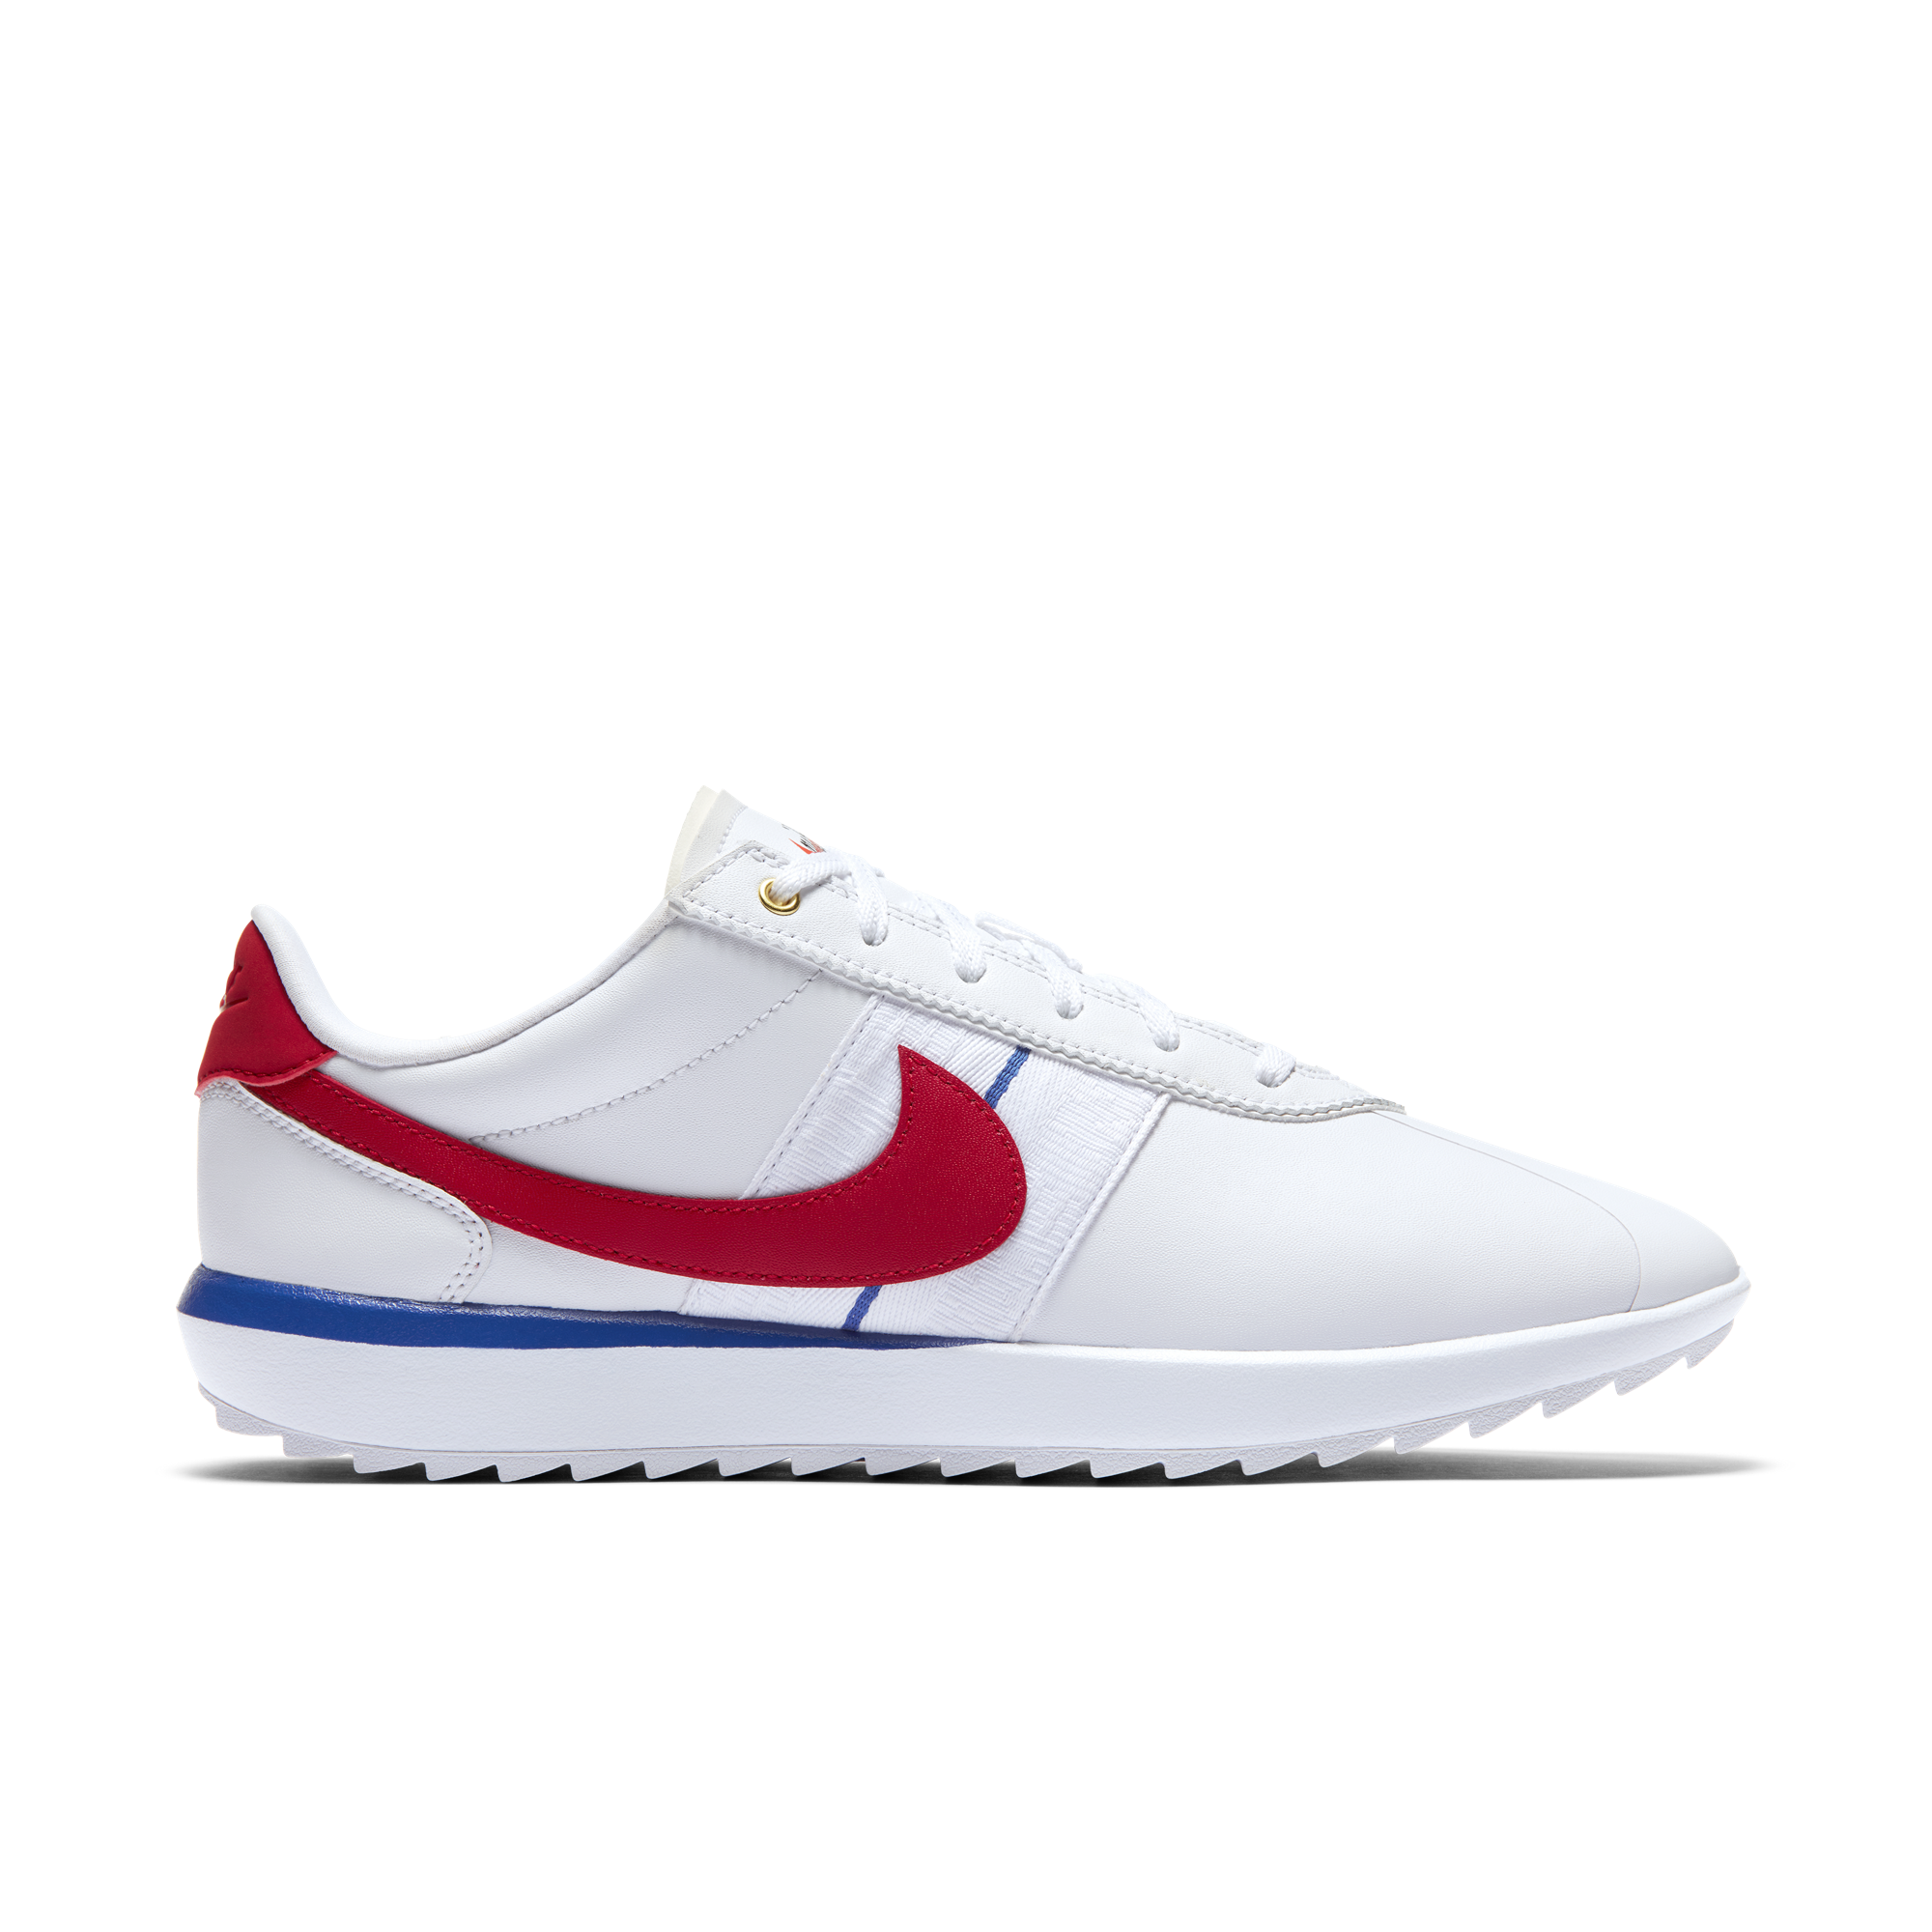 nike red cortez womens